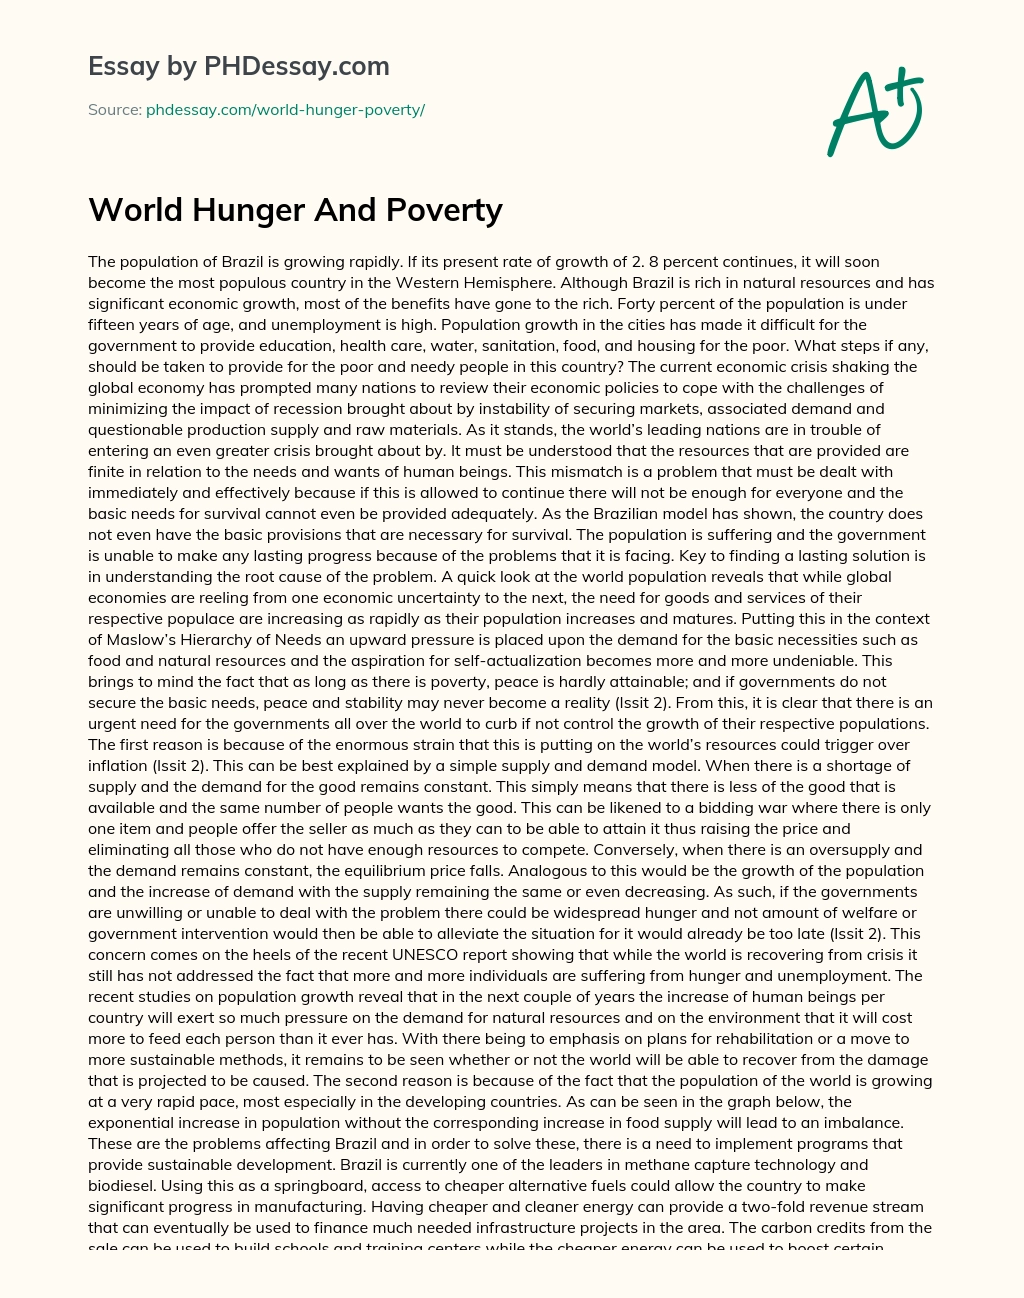 World Hunger And Poverty essay